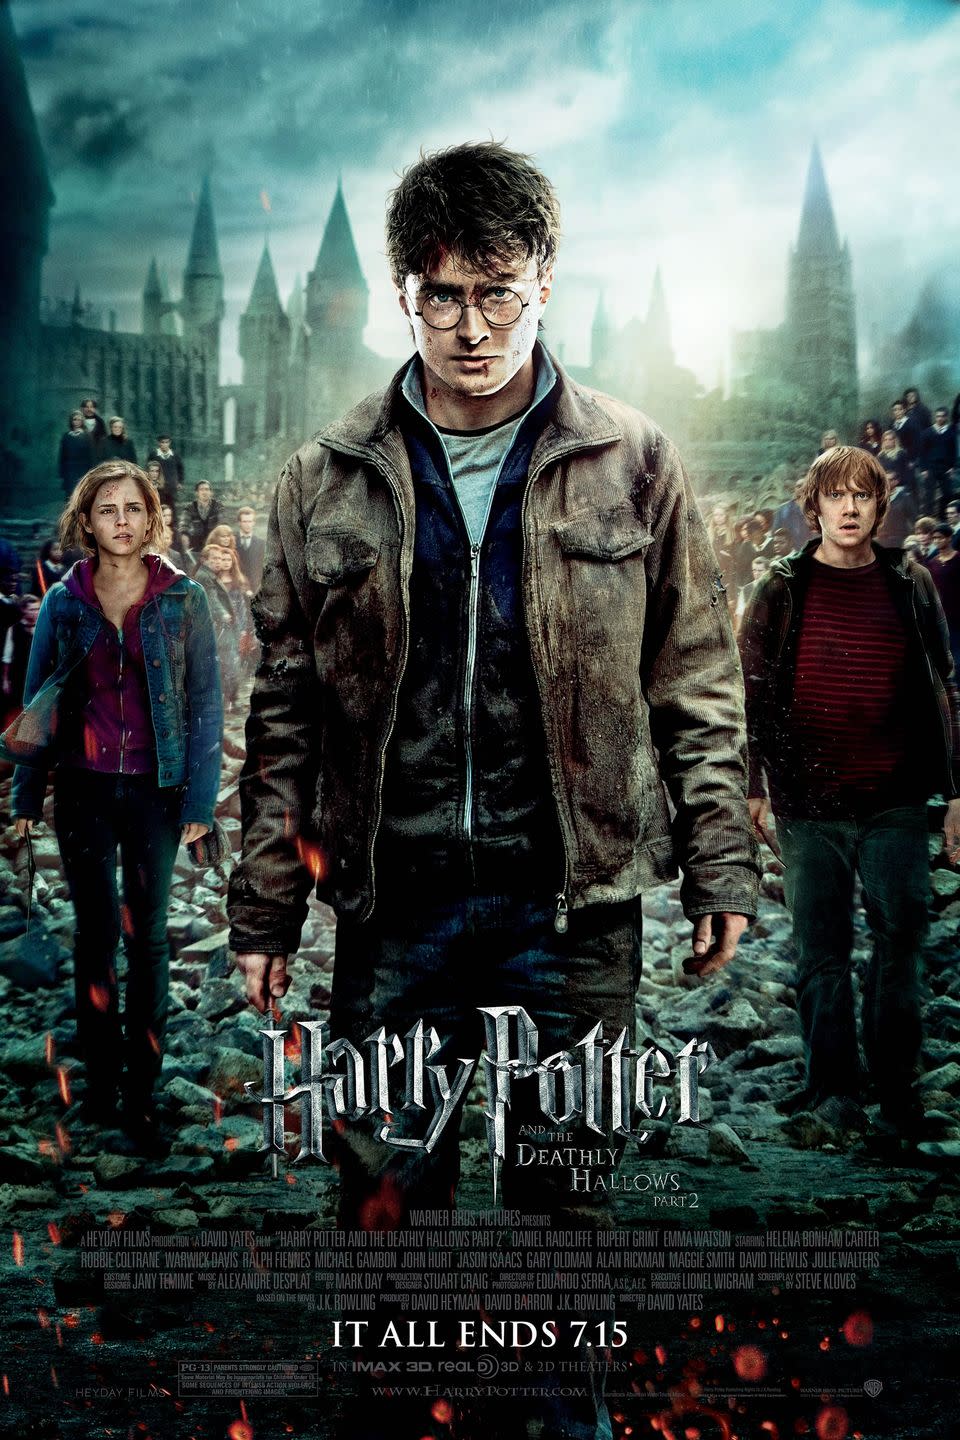 10) Harry Potter and the Deathly Hallows Part 2